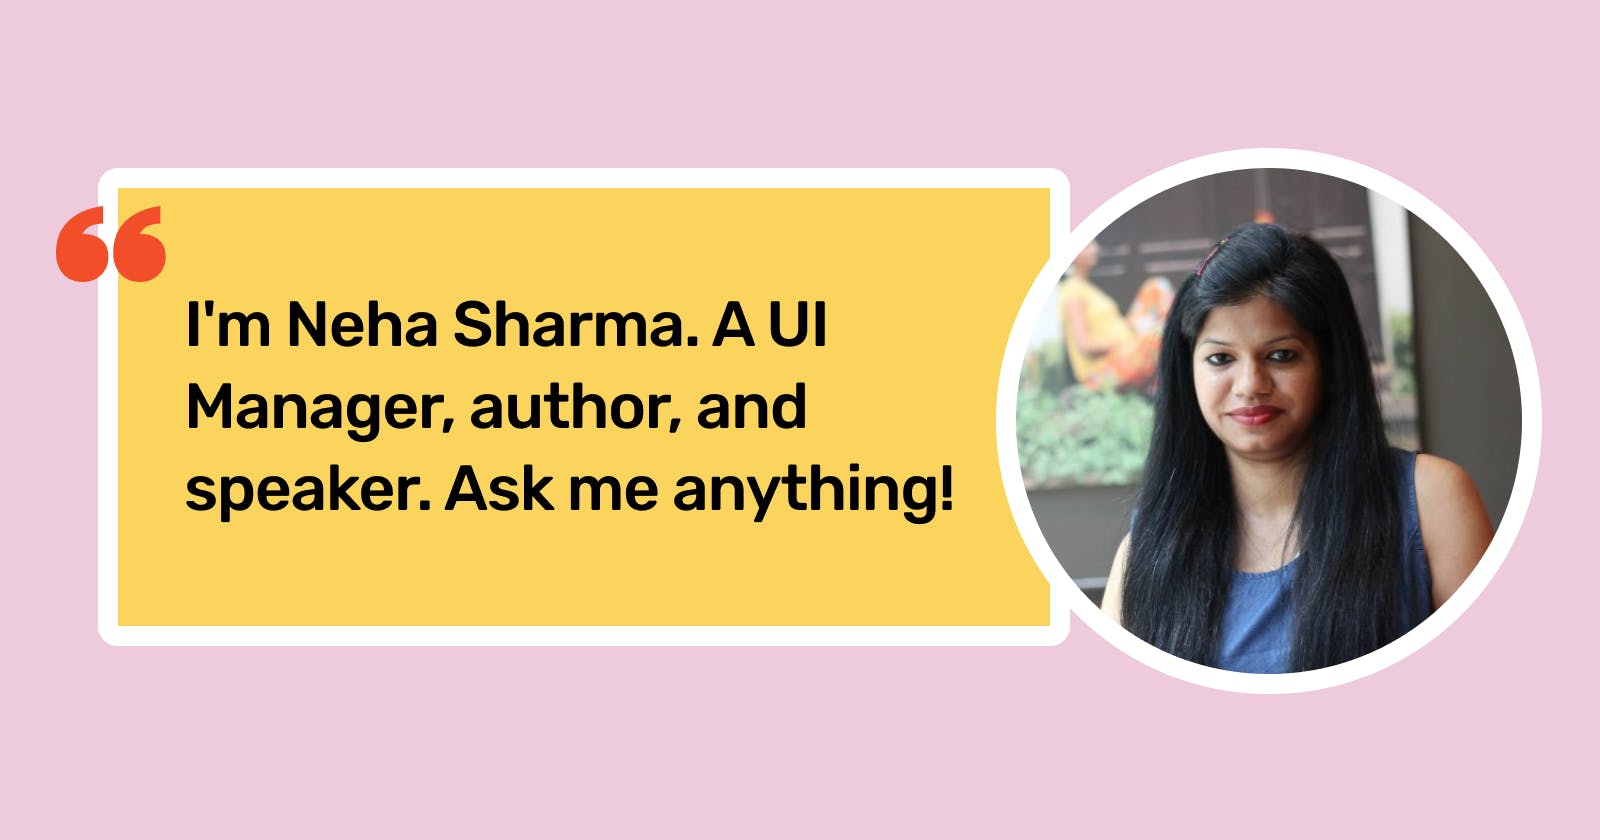 I'm Neha Sharma. A UI manager, author, and speaker. Ask me anything!